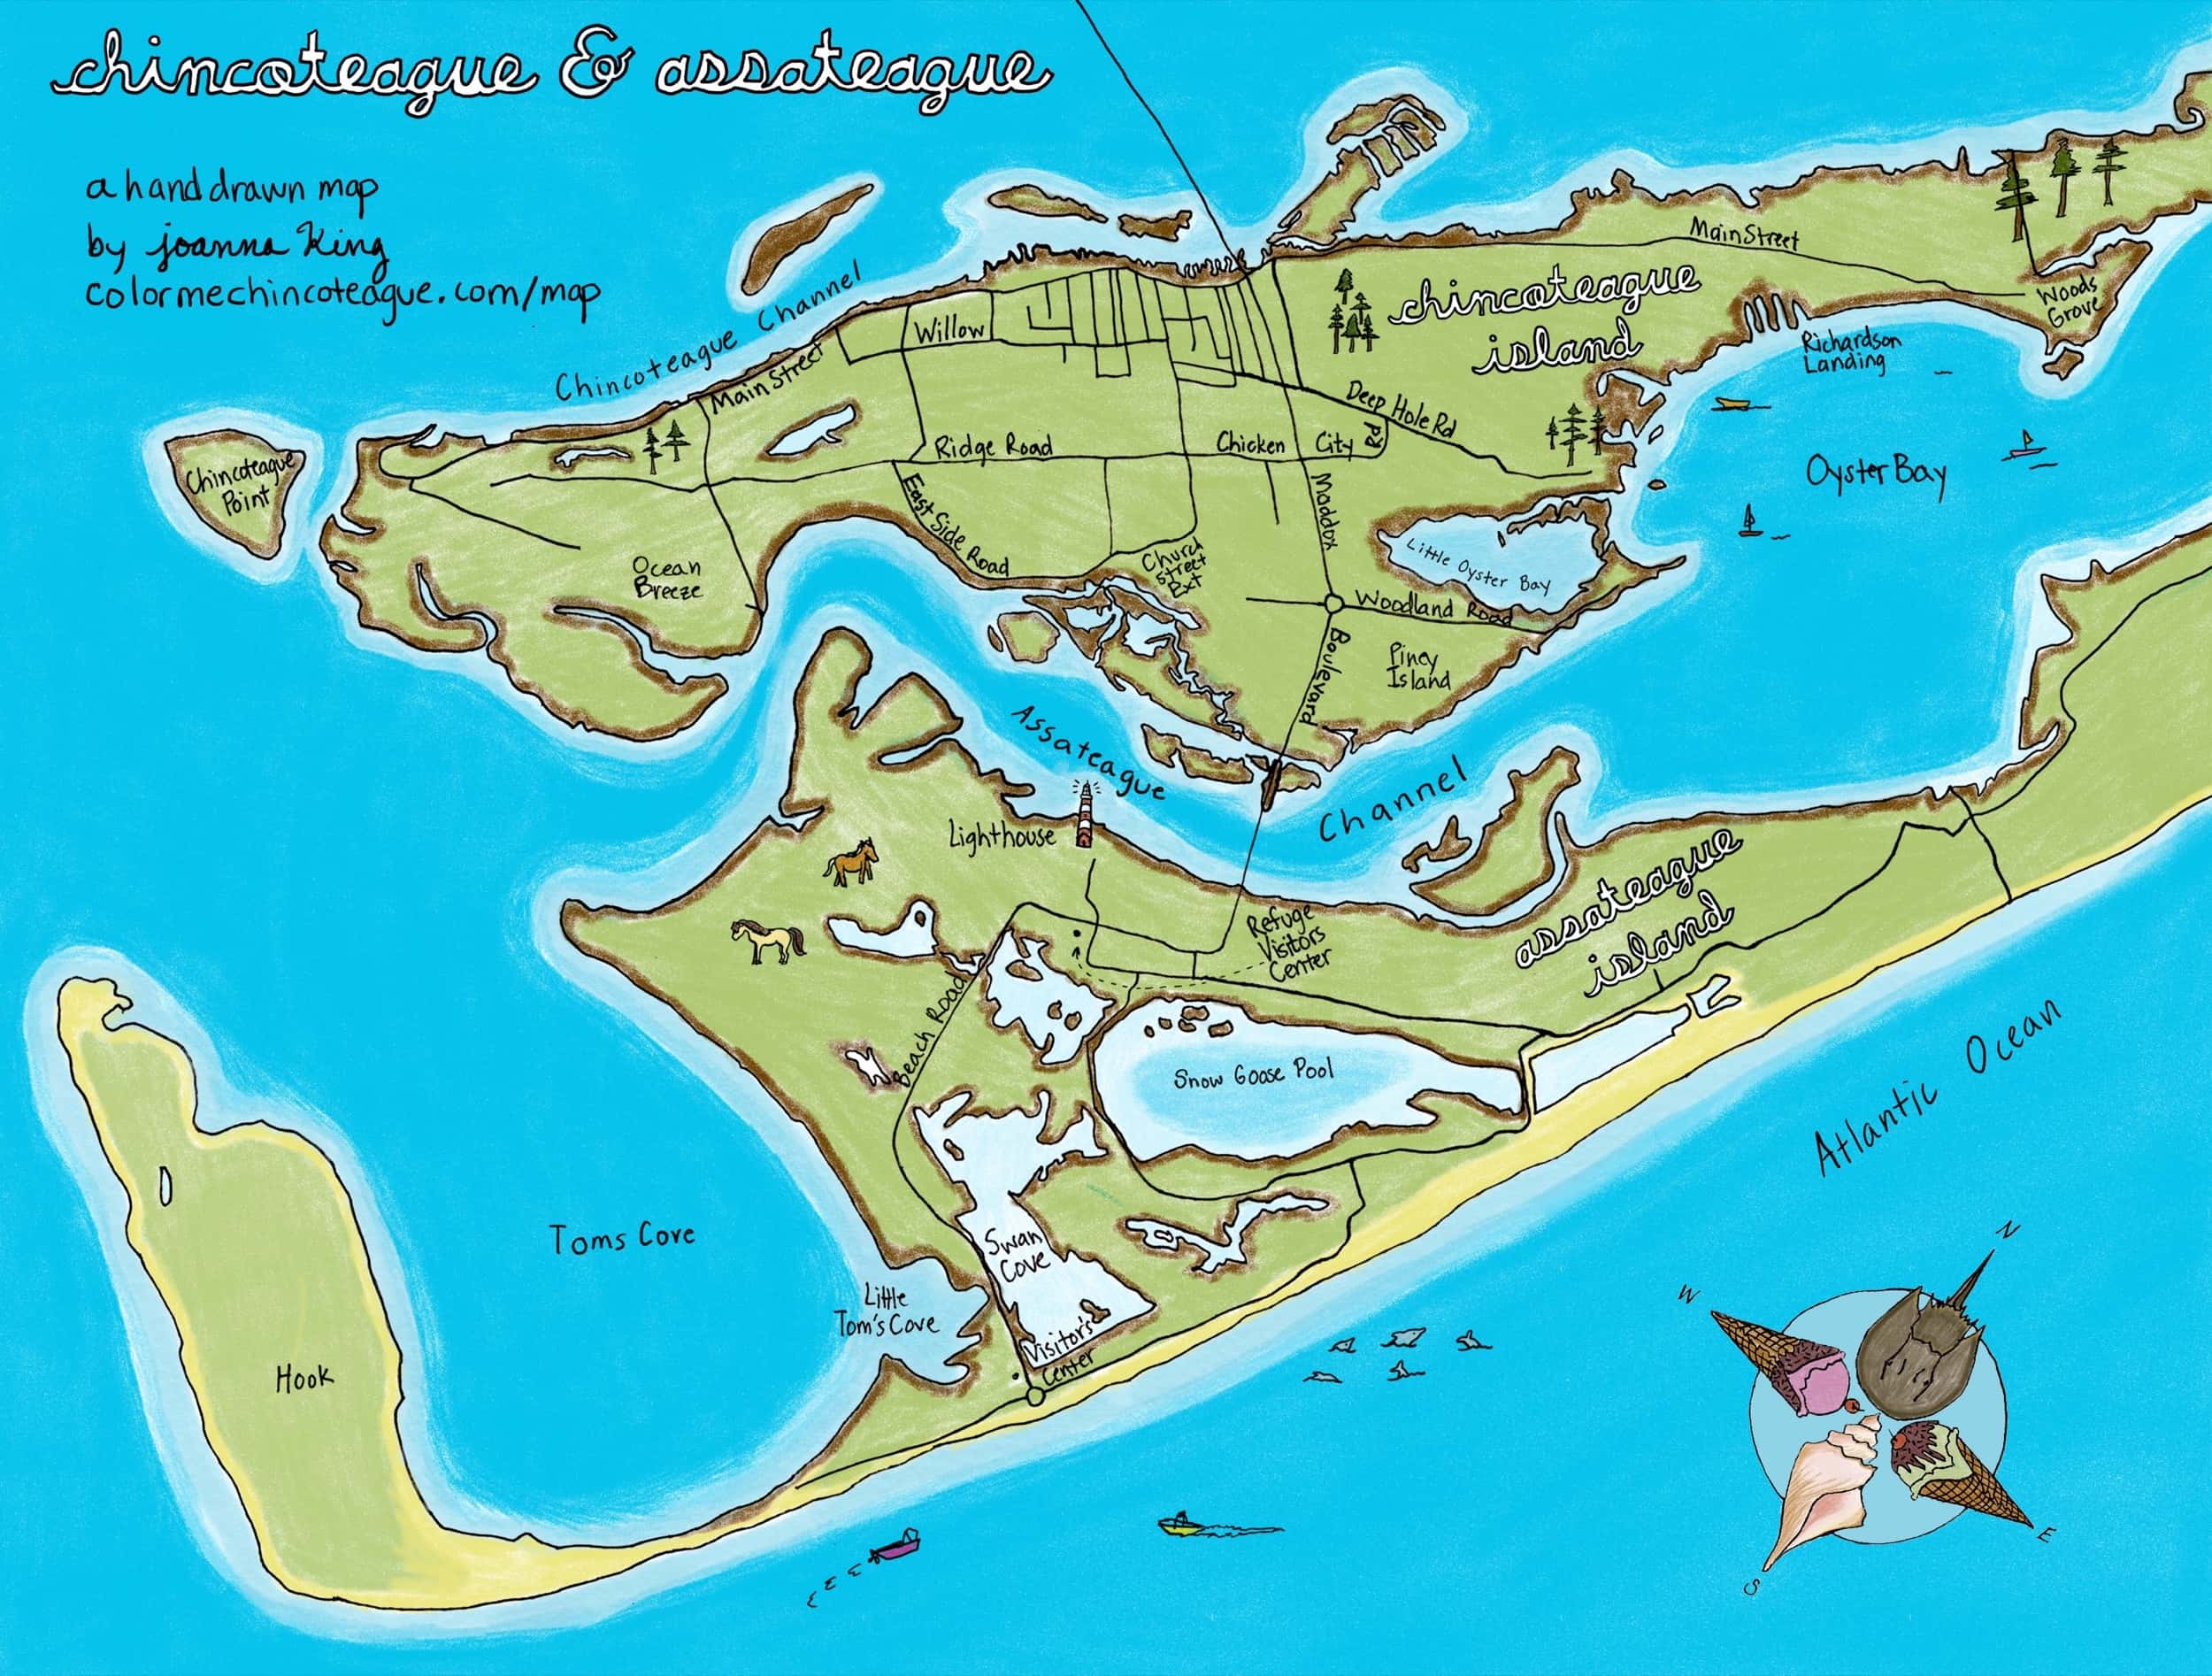 This map of Chincoteague and Assateague was hand-drawn and colored by Joanna King.